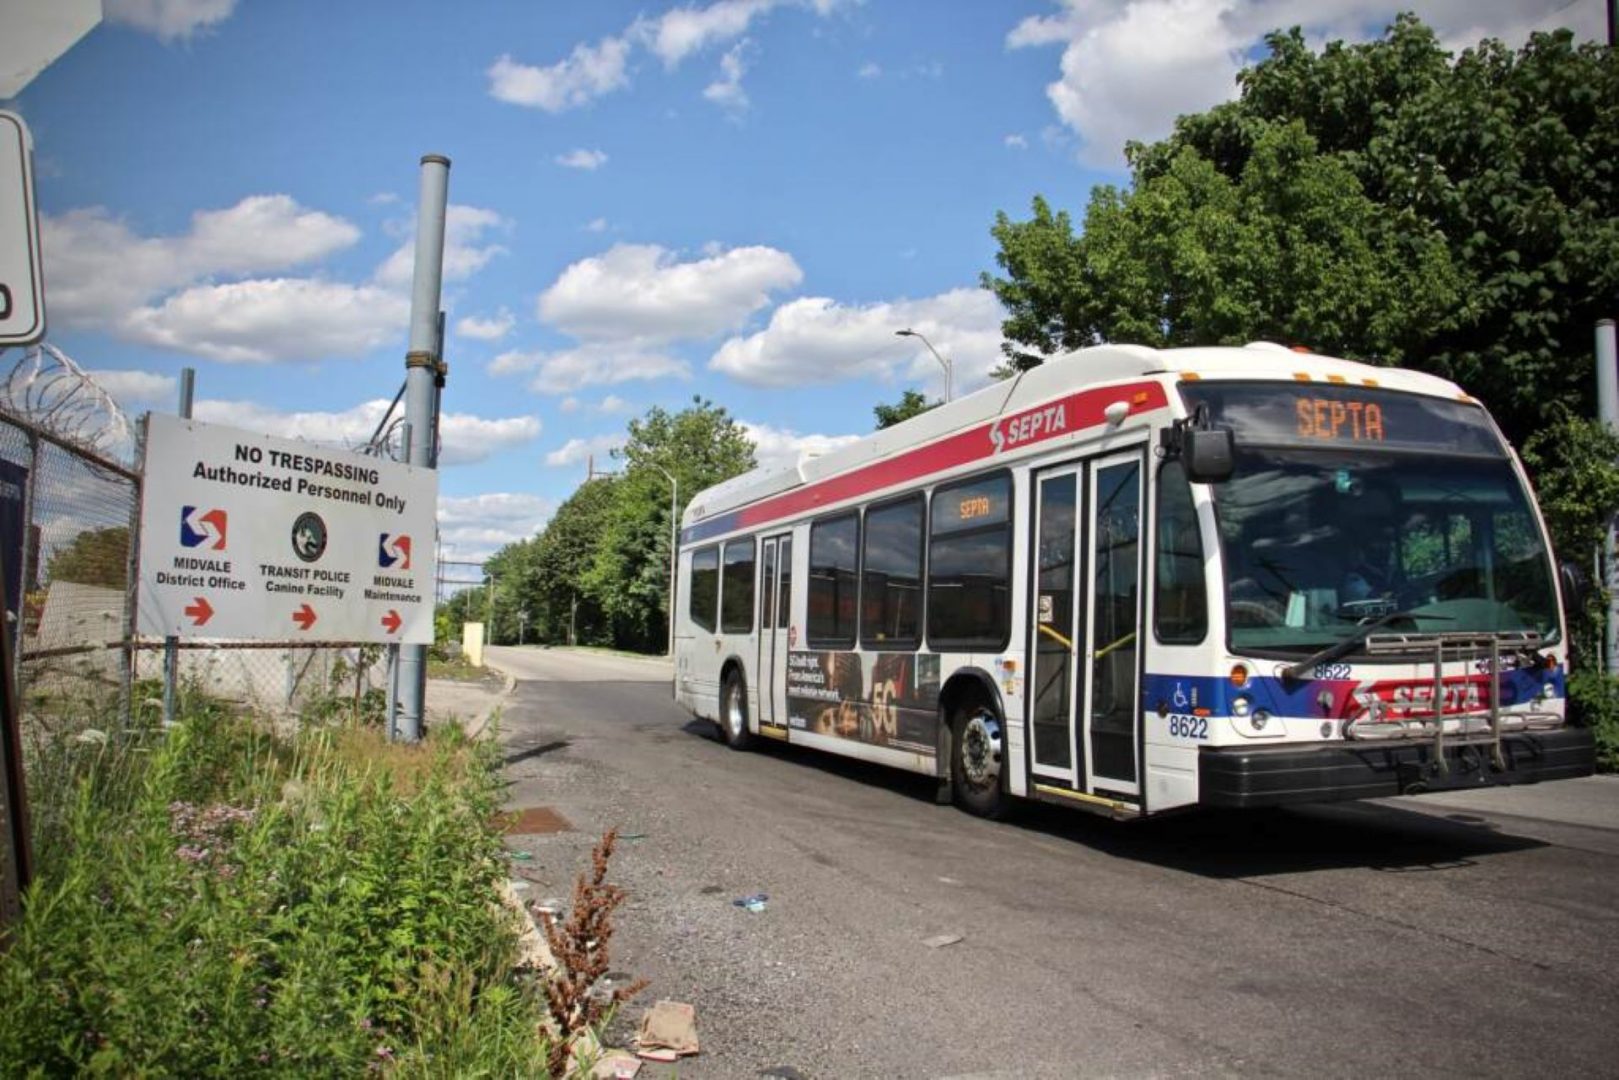 A bus leaves the Midvale depot in Nicetown, where SEPTA operates a natural gas burning generation plant.